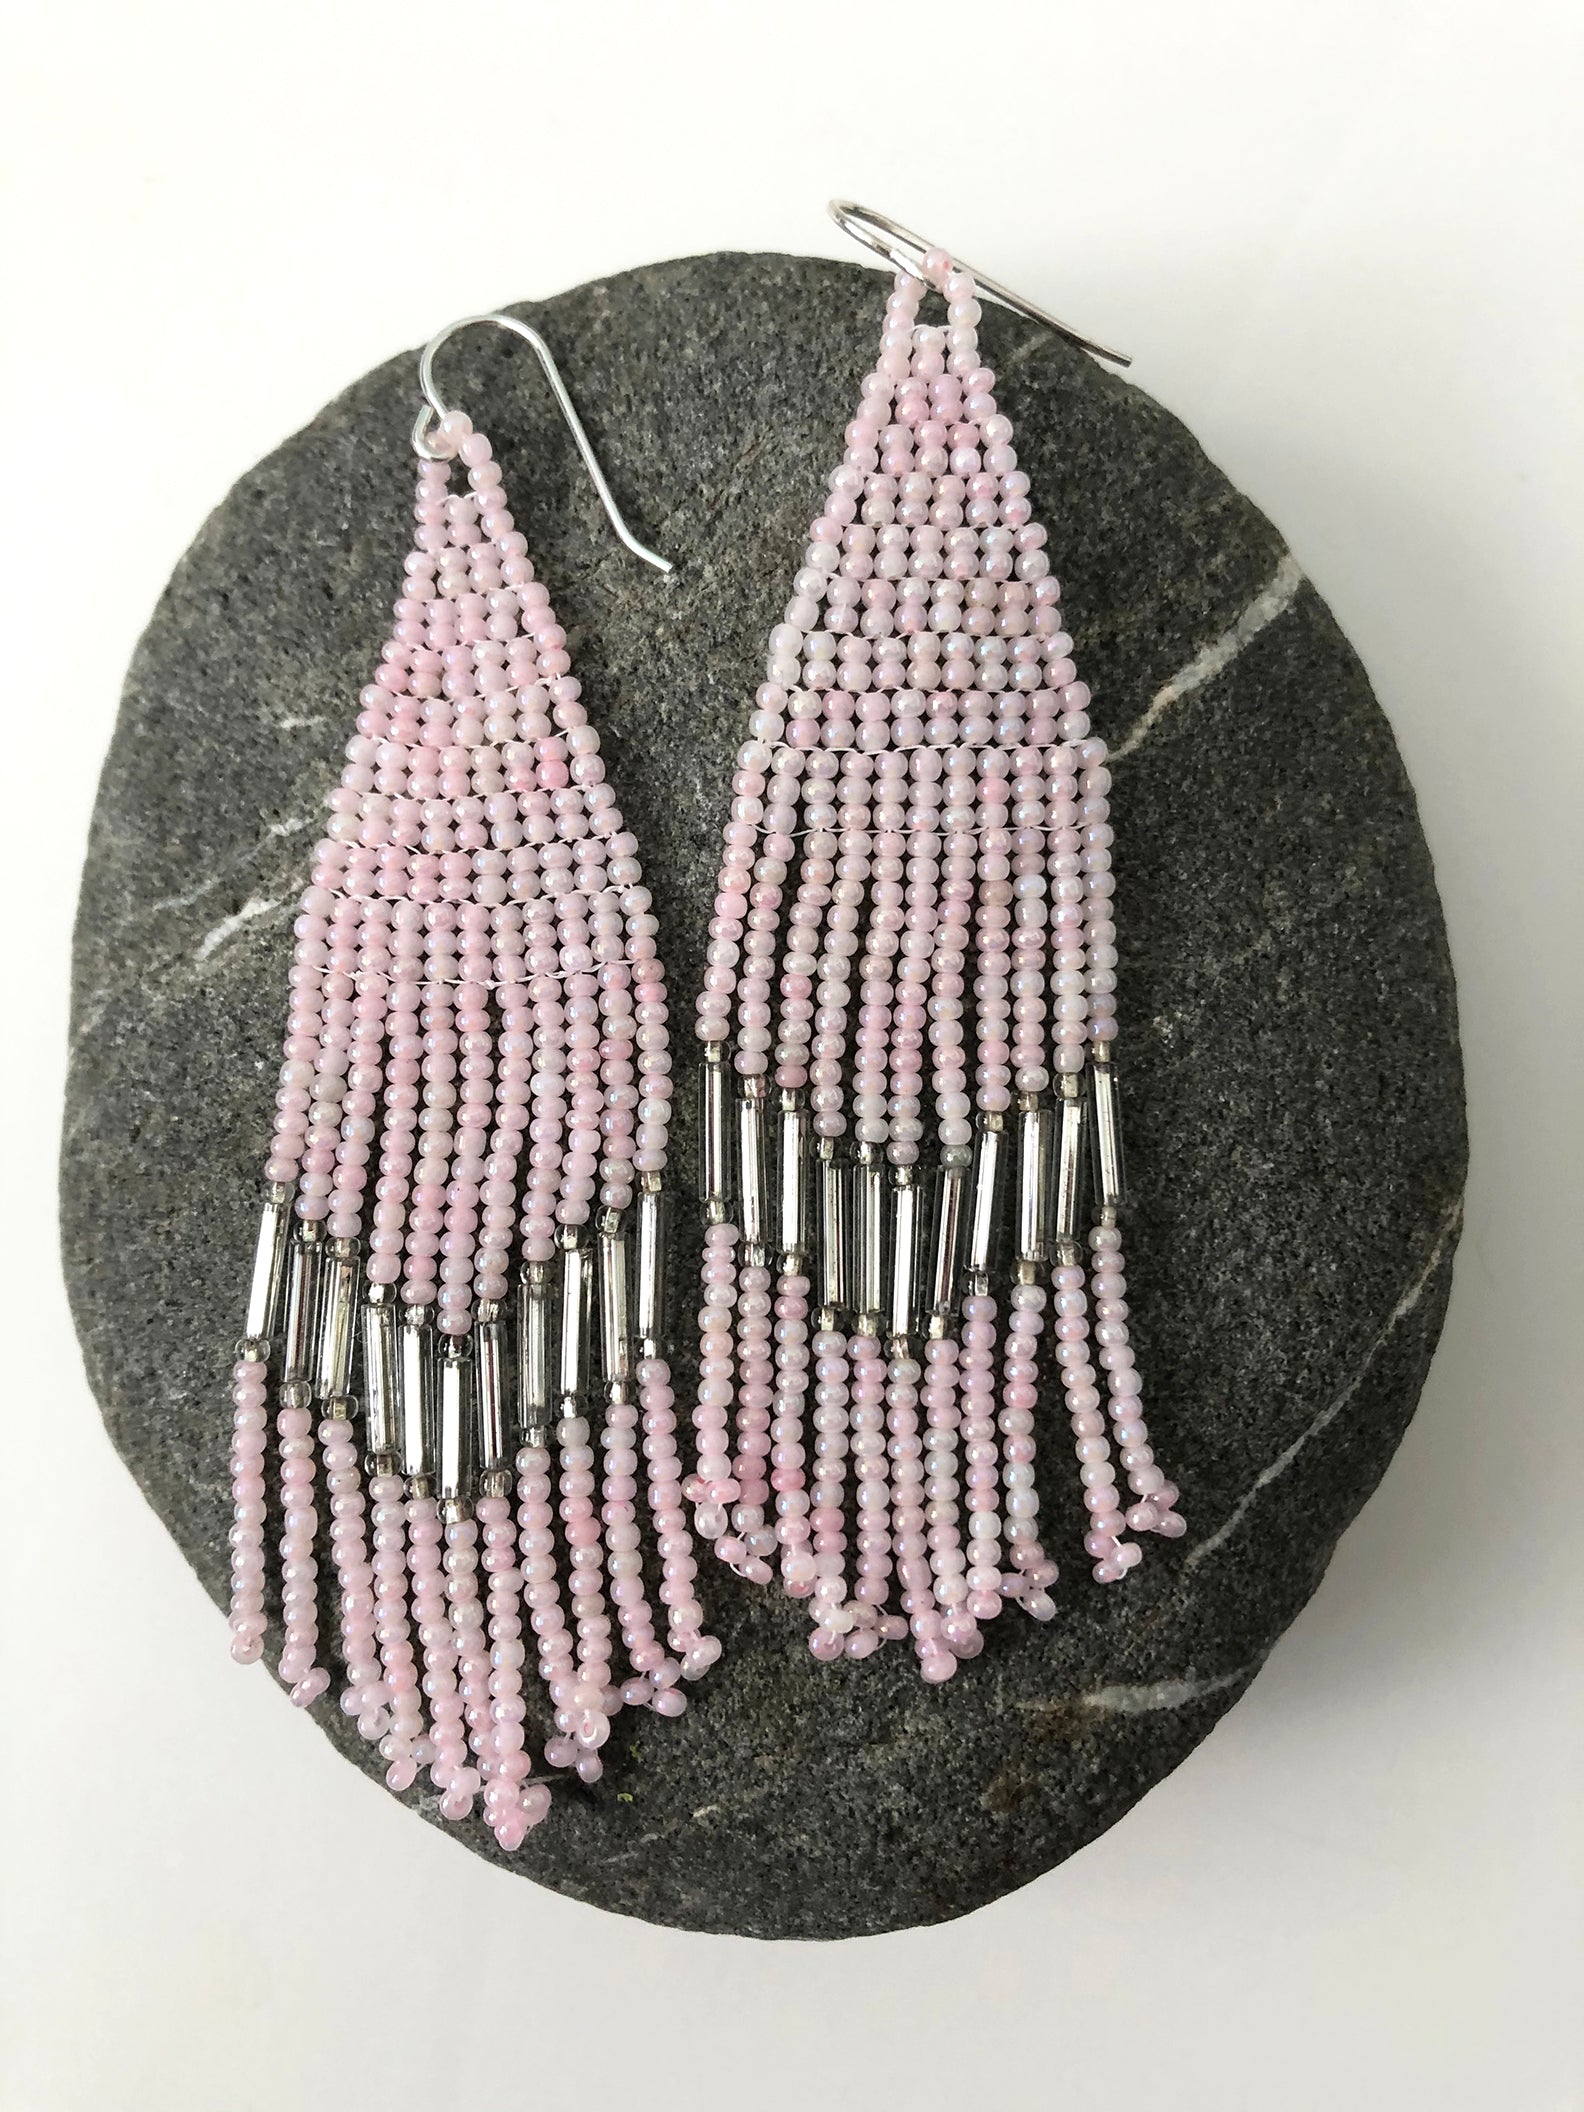 Handmade Seed Bead Fringe Earrings - Pink Art Deco Style with Antique Mirror Beads